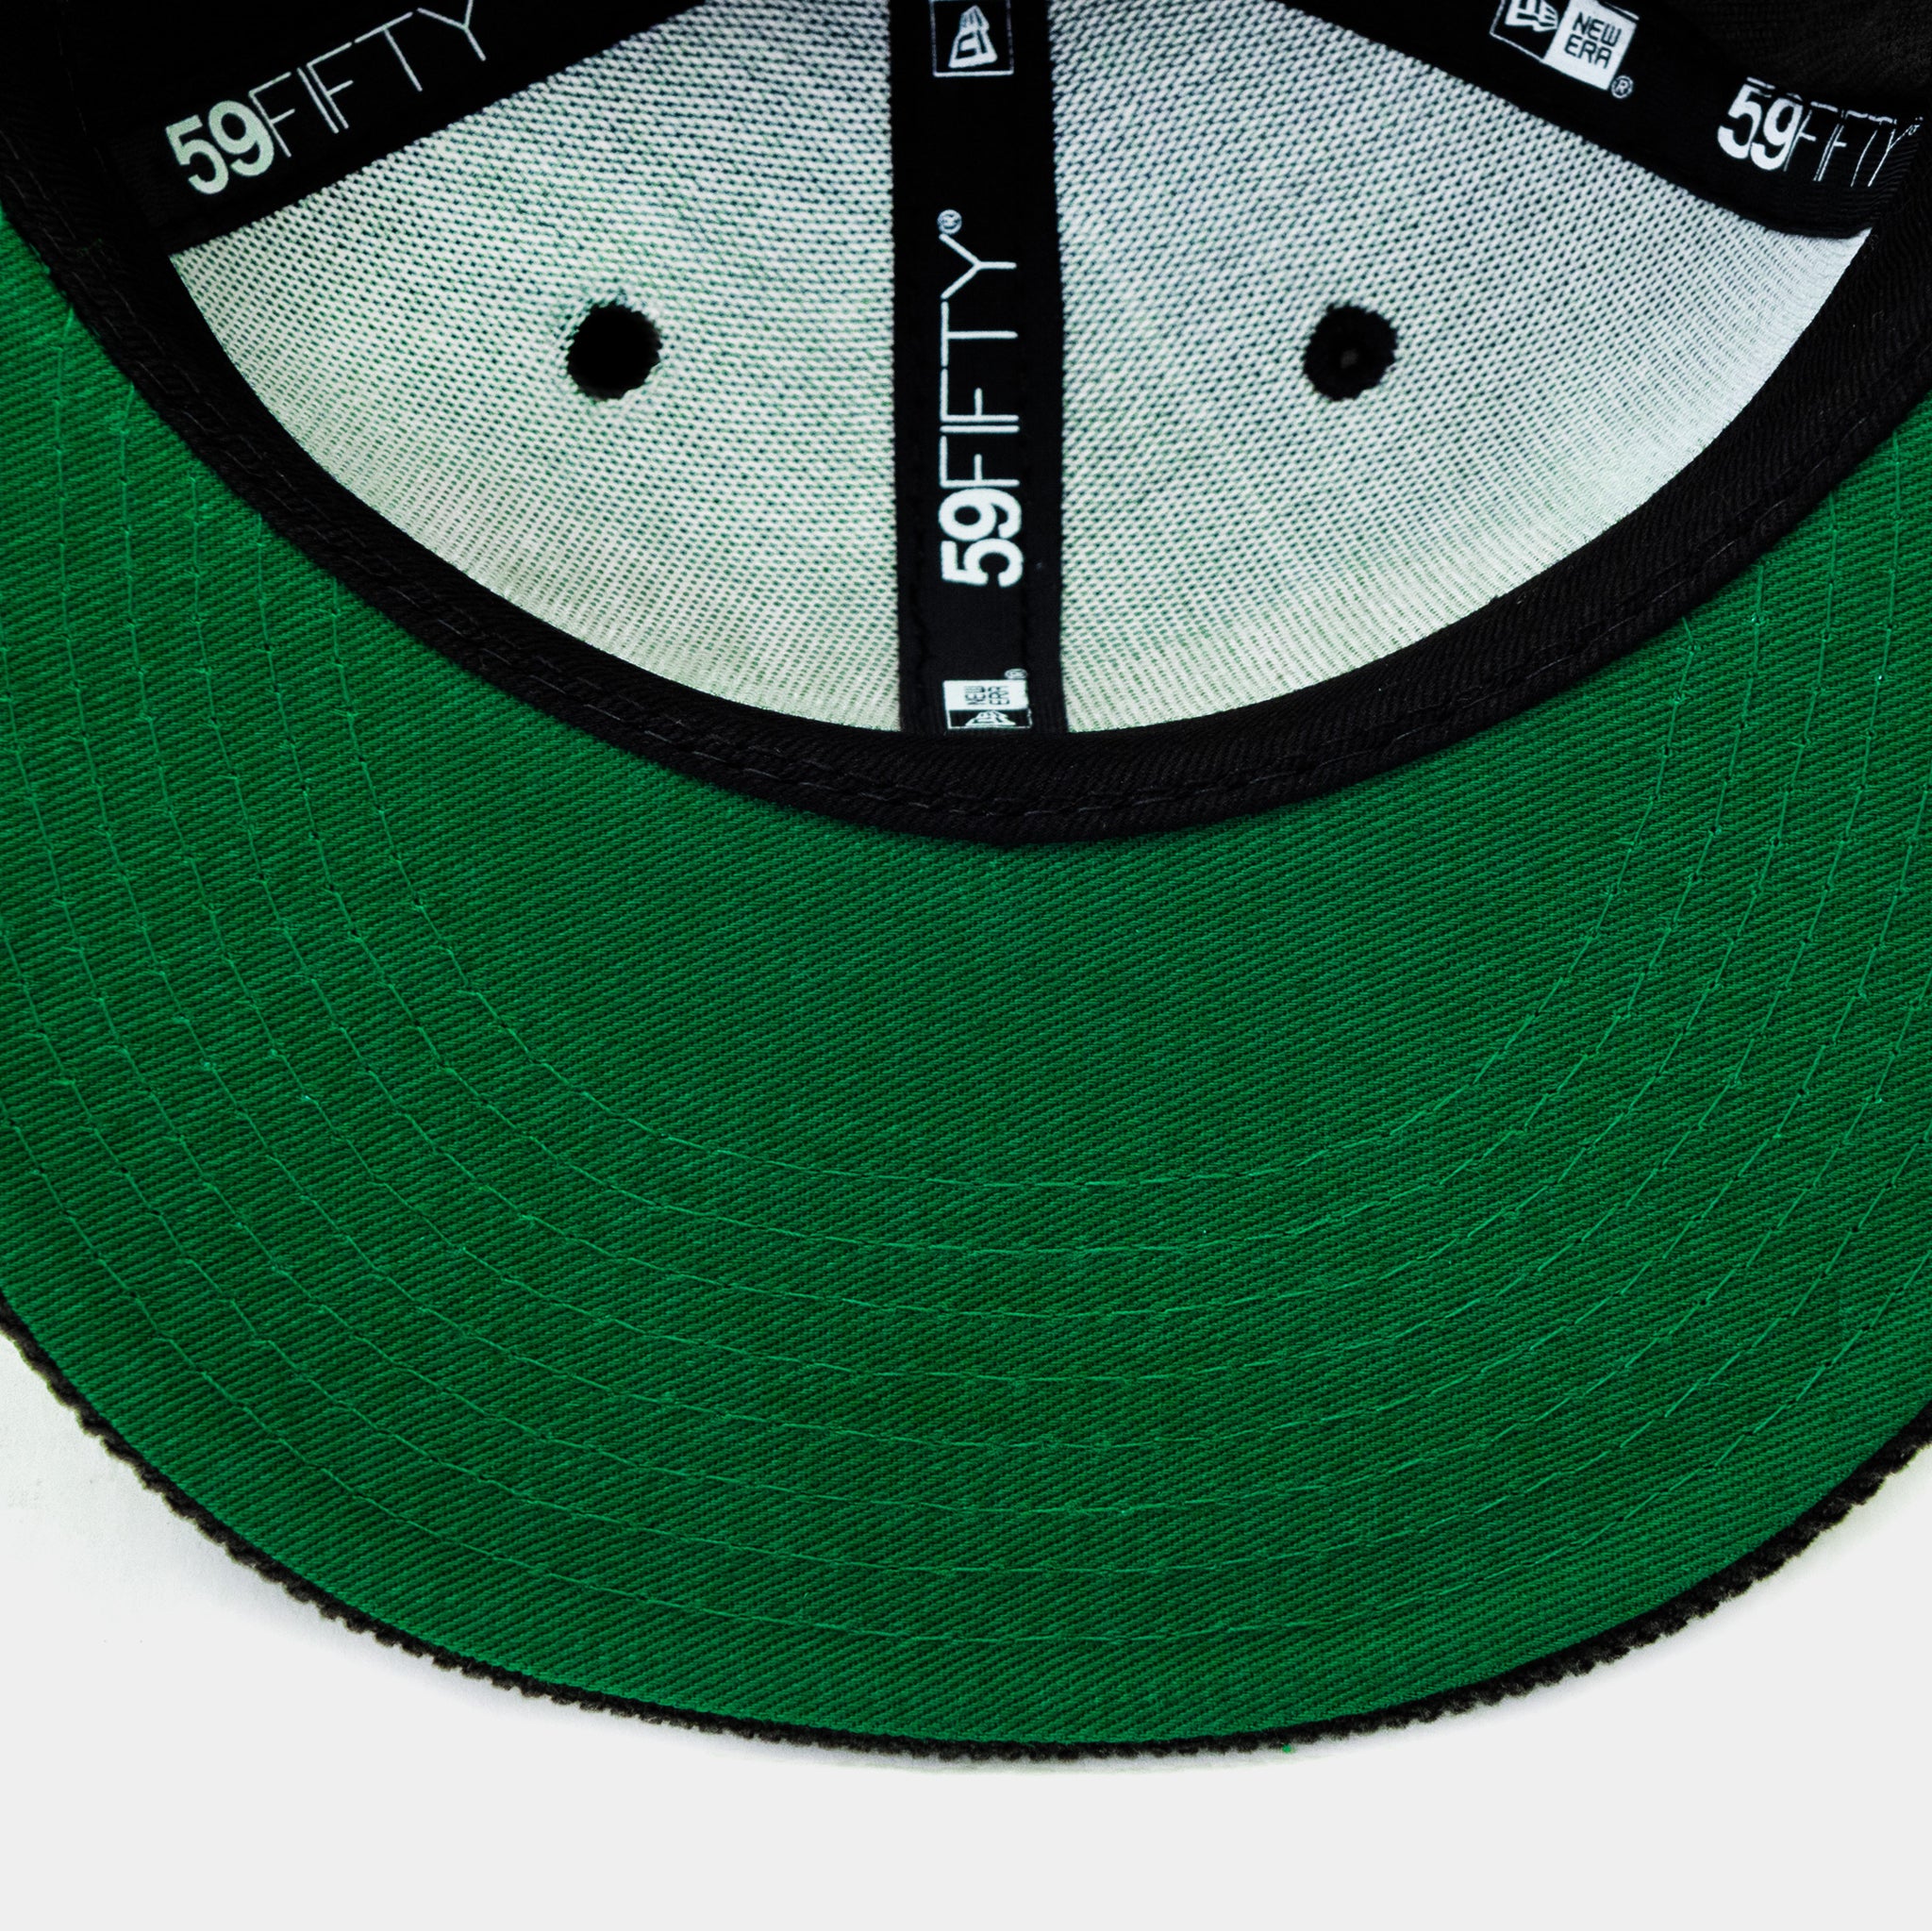 New Era Oakland A's Outdoor 59FIFTY Mens Fitted Hat White Green